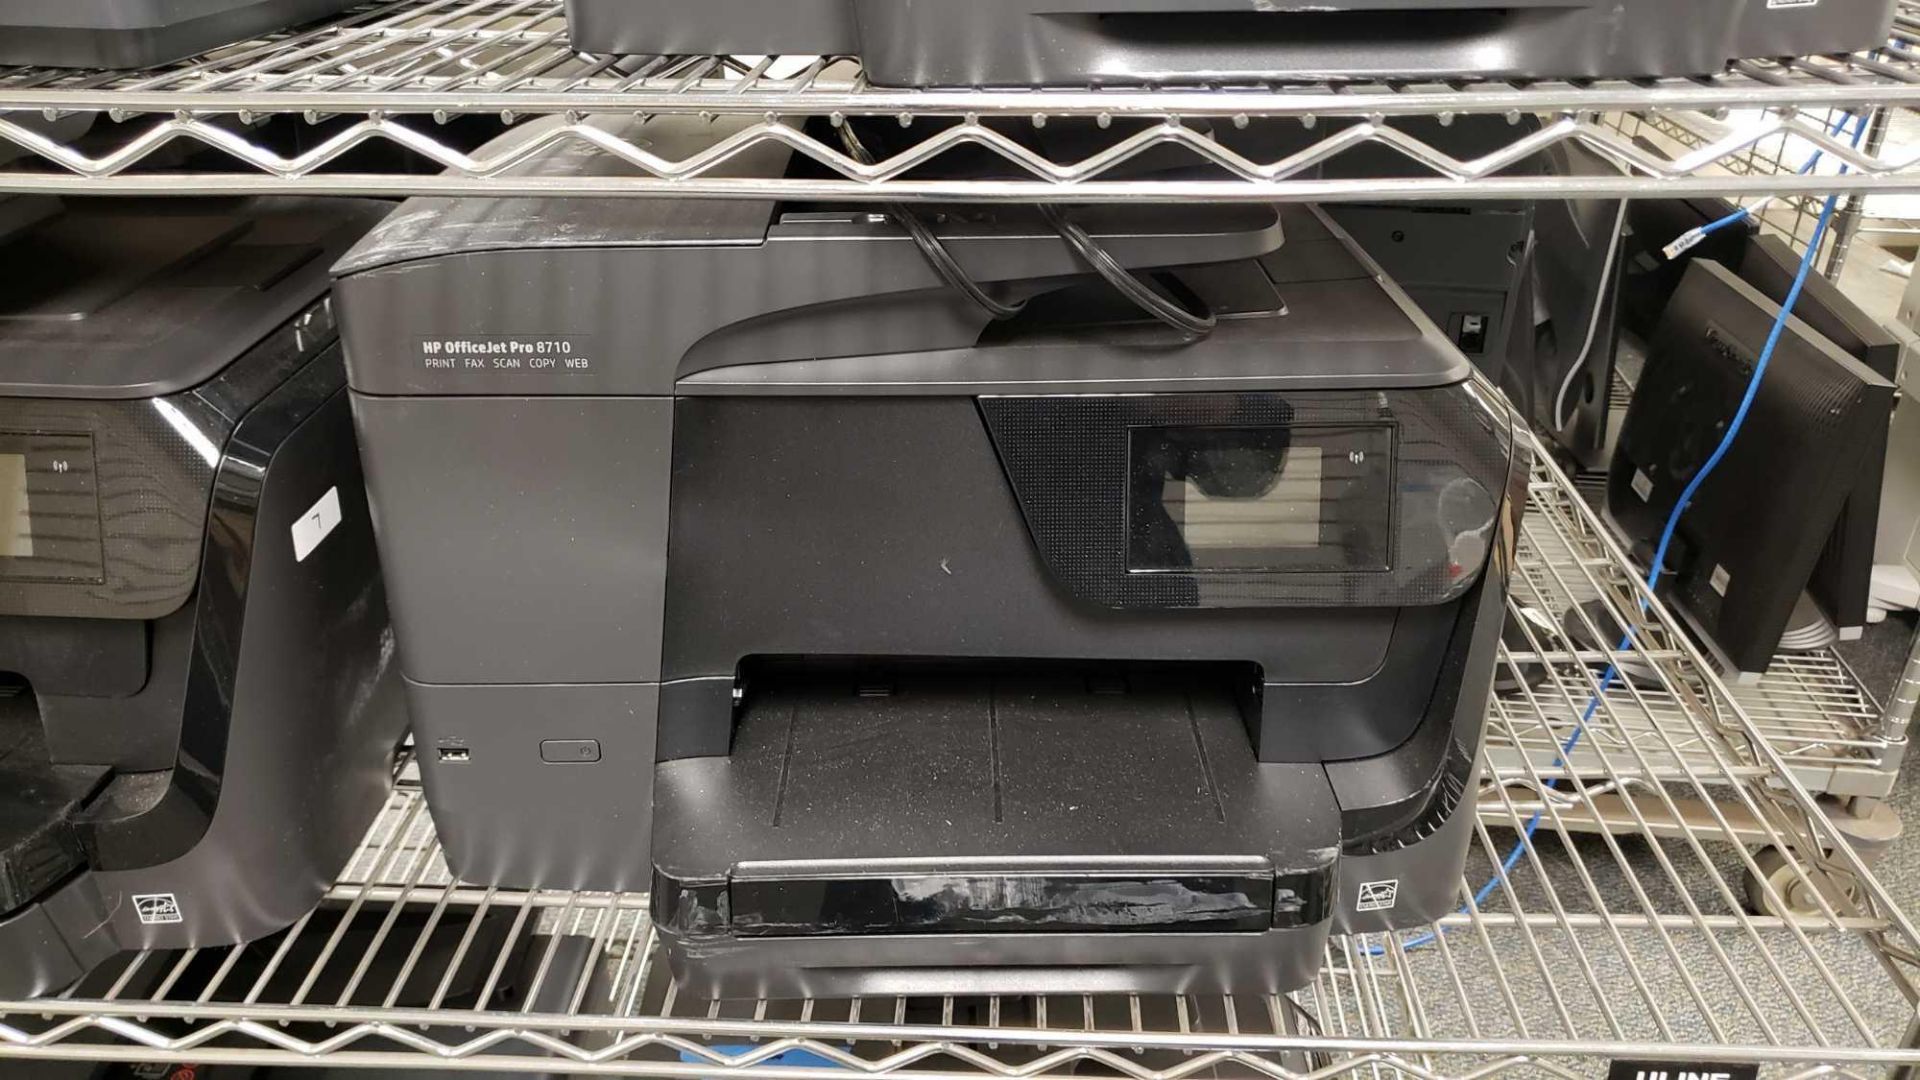 Lot of (3) HP Officejet Pro 8710 Printers - Image 2 of 3